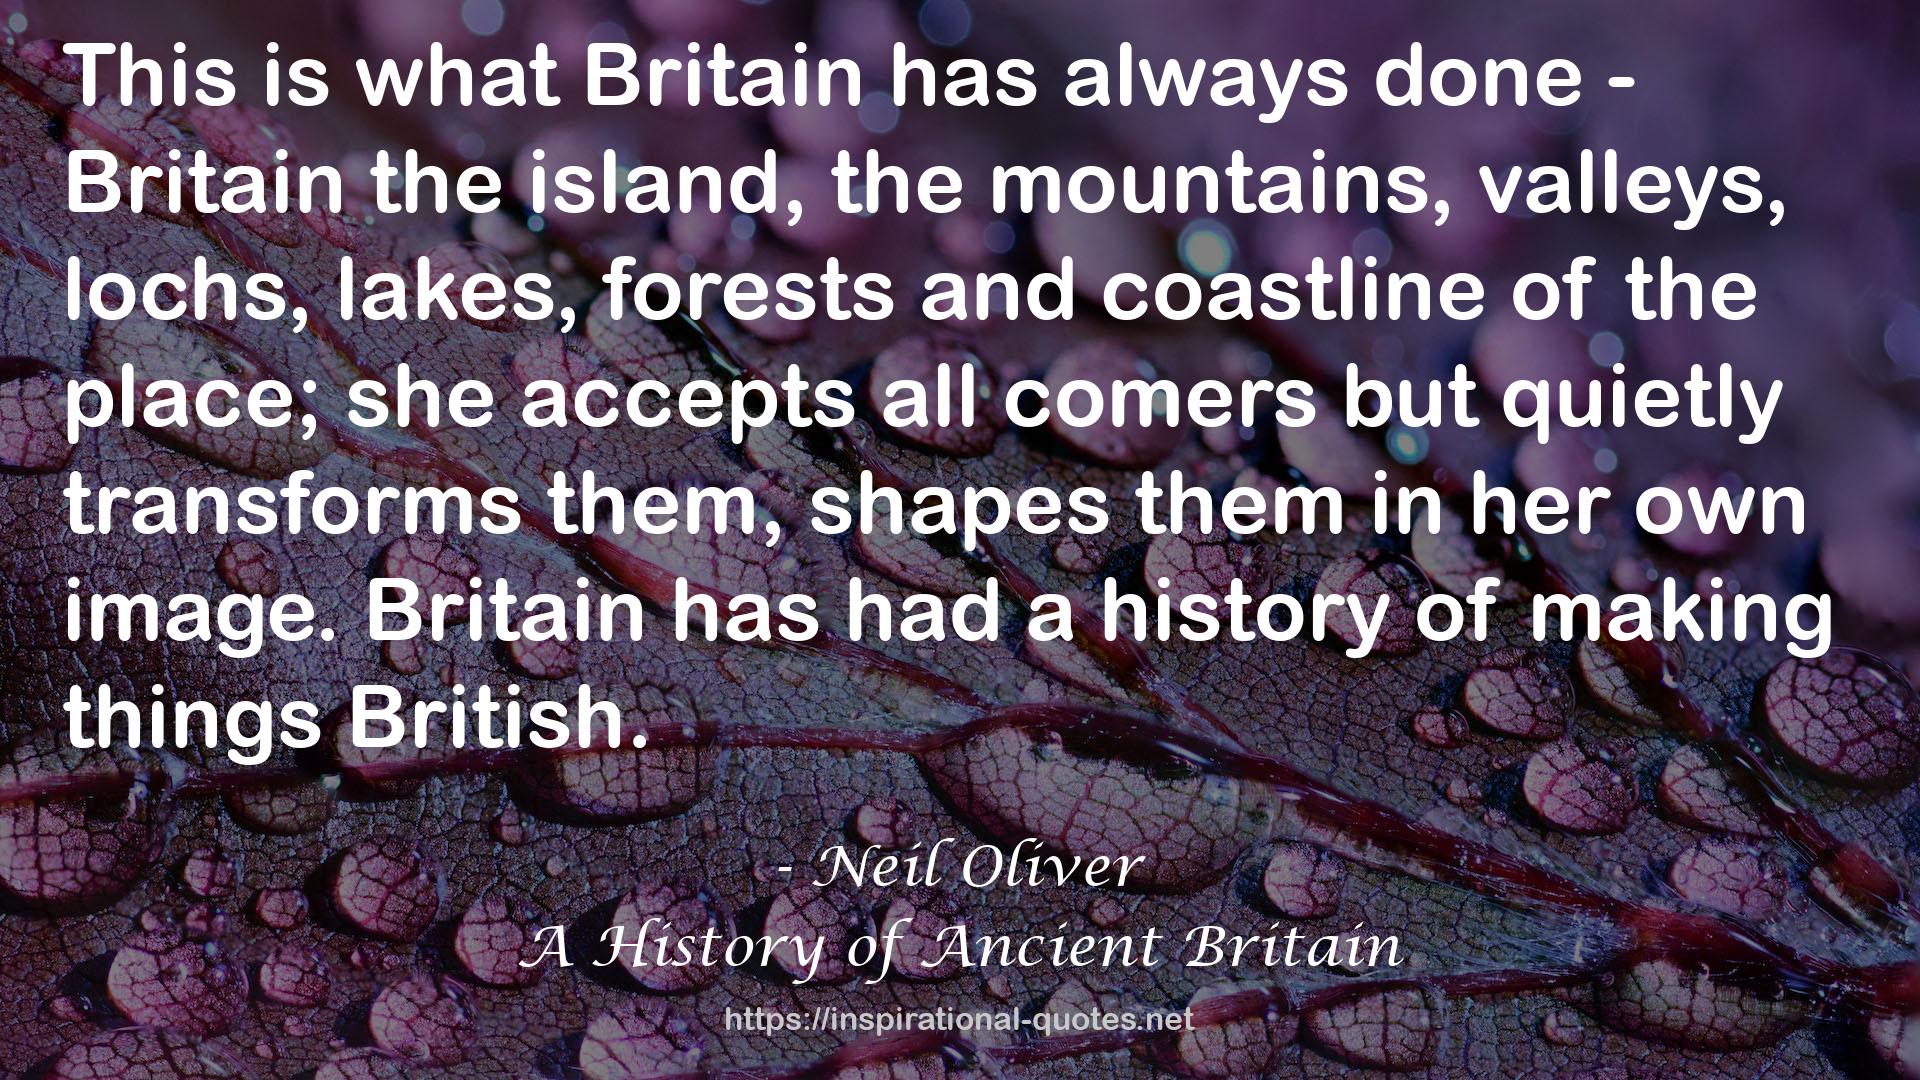 A History of Ancient Britain QUOTES